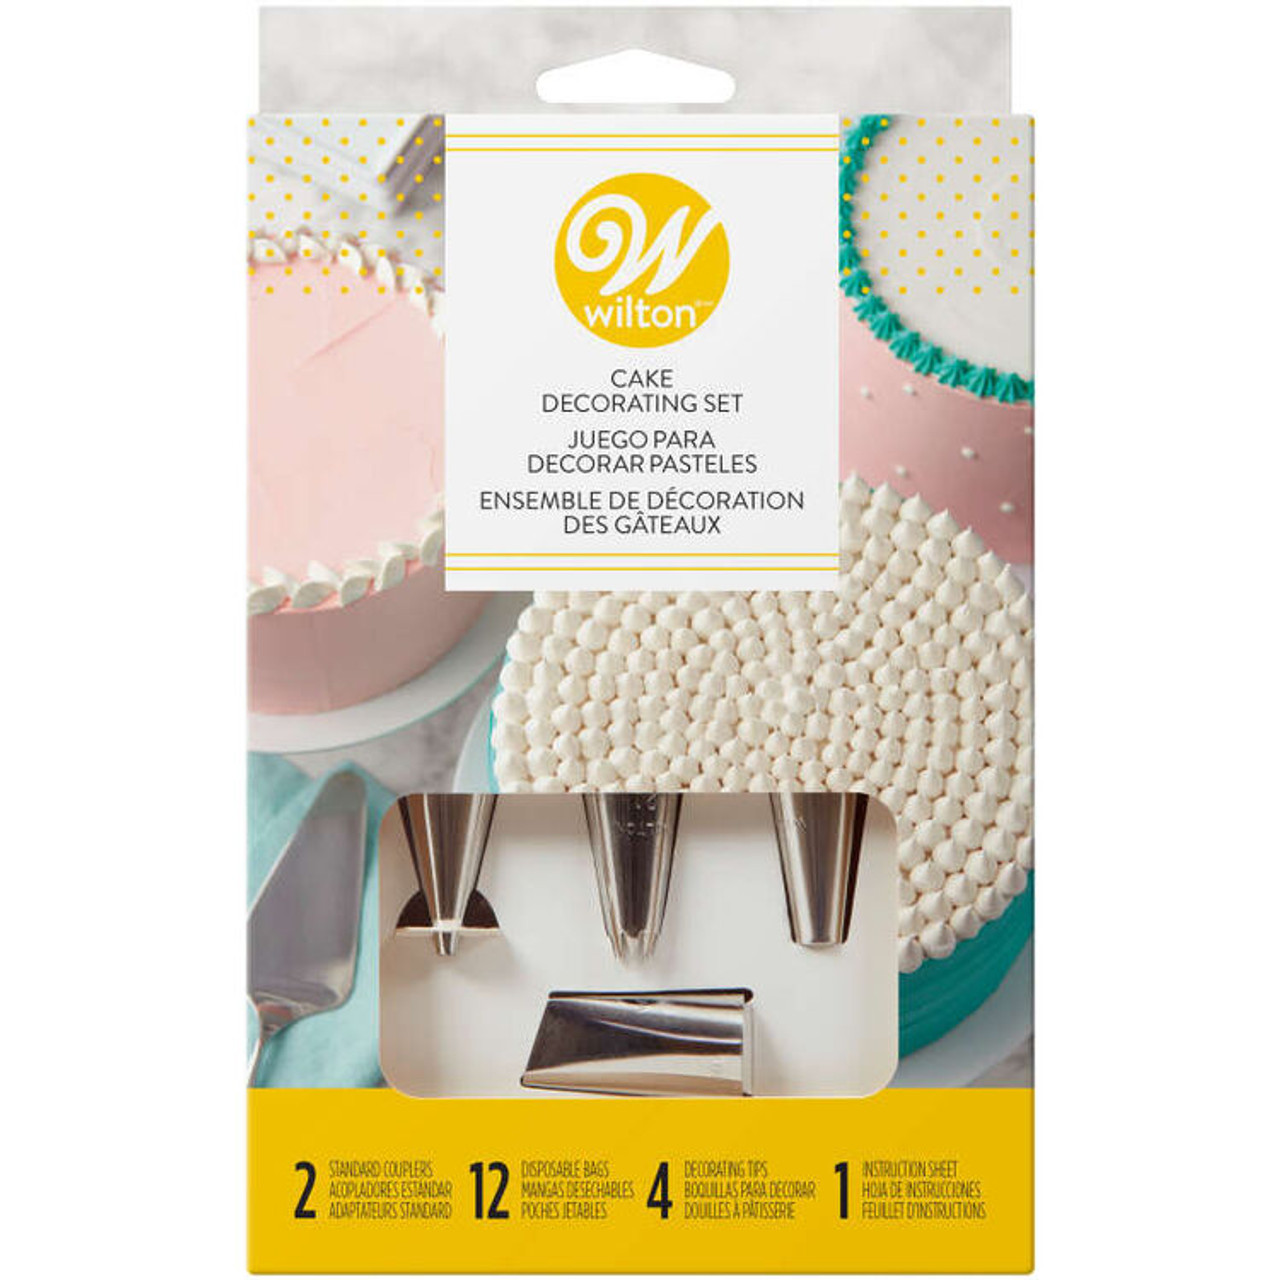 https://cdn11.bigcommerce.com/s-w8h1g5/images/stencil/1280x1280/products/12979/35392/2104-5840-Wilton-Cake-Decorating-Set-with-Piping-Tips-Decorating-Bags-Couplers-and-Instructions-18-Piece-M__59246.1652593342.jpg?c=2